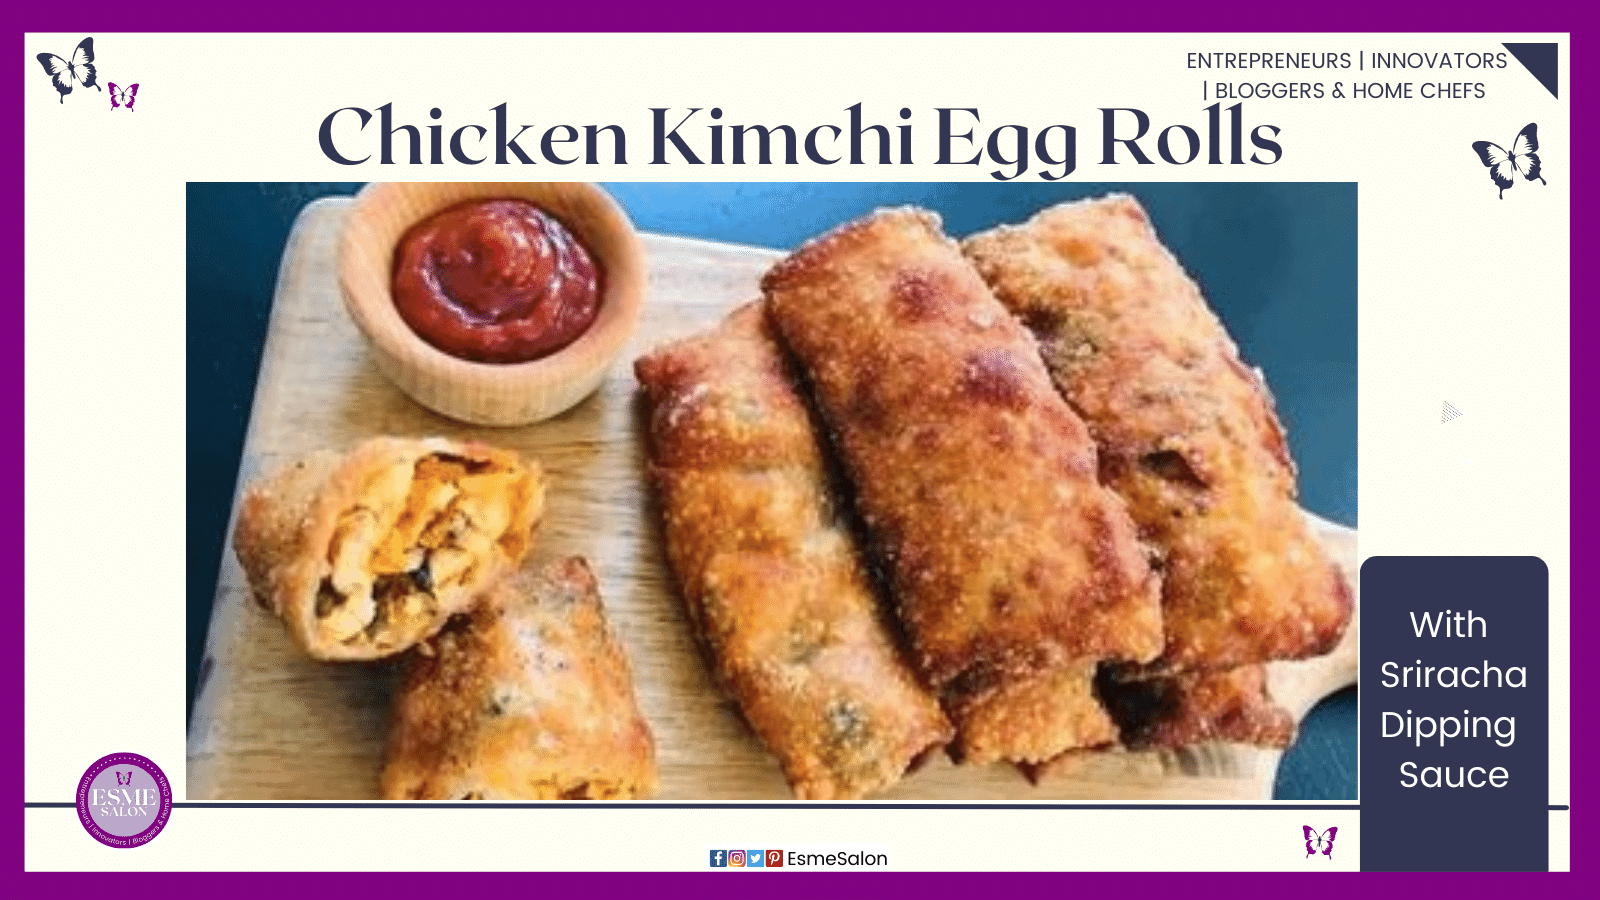 an image of three full and one cut in half Chicken Kimchi Egg Rolls with Sriracha sauce o the side